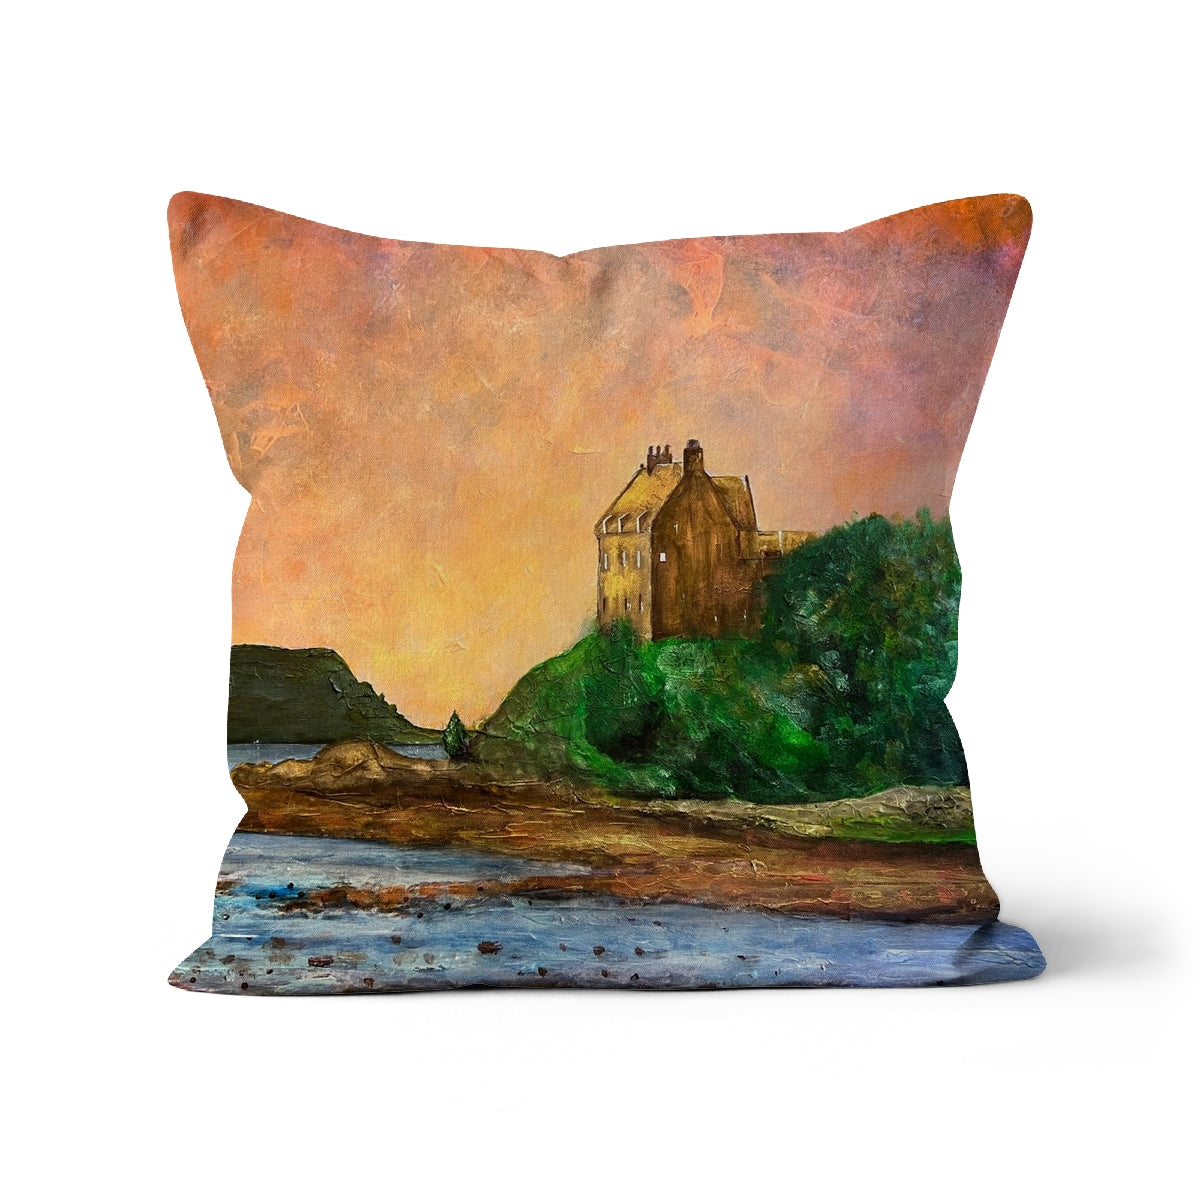 Duntrune Castle Art Gifts Cushion-Cushions-Historic & Iconic Scotland Art Gallery-Faux Suede-22"x22"-Paintings, Prints, Homeware, Art Gifts From Scotland By Scottish Artist Kevin Hunter